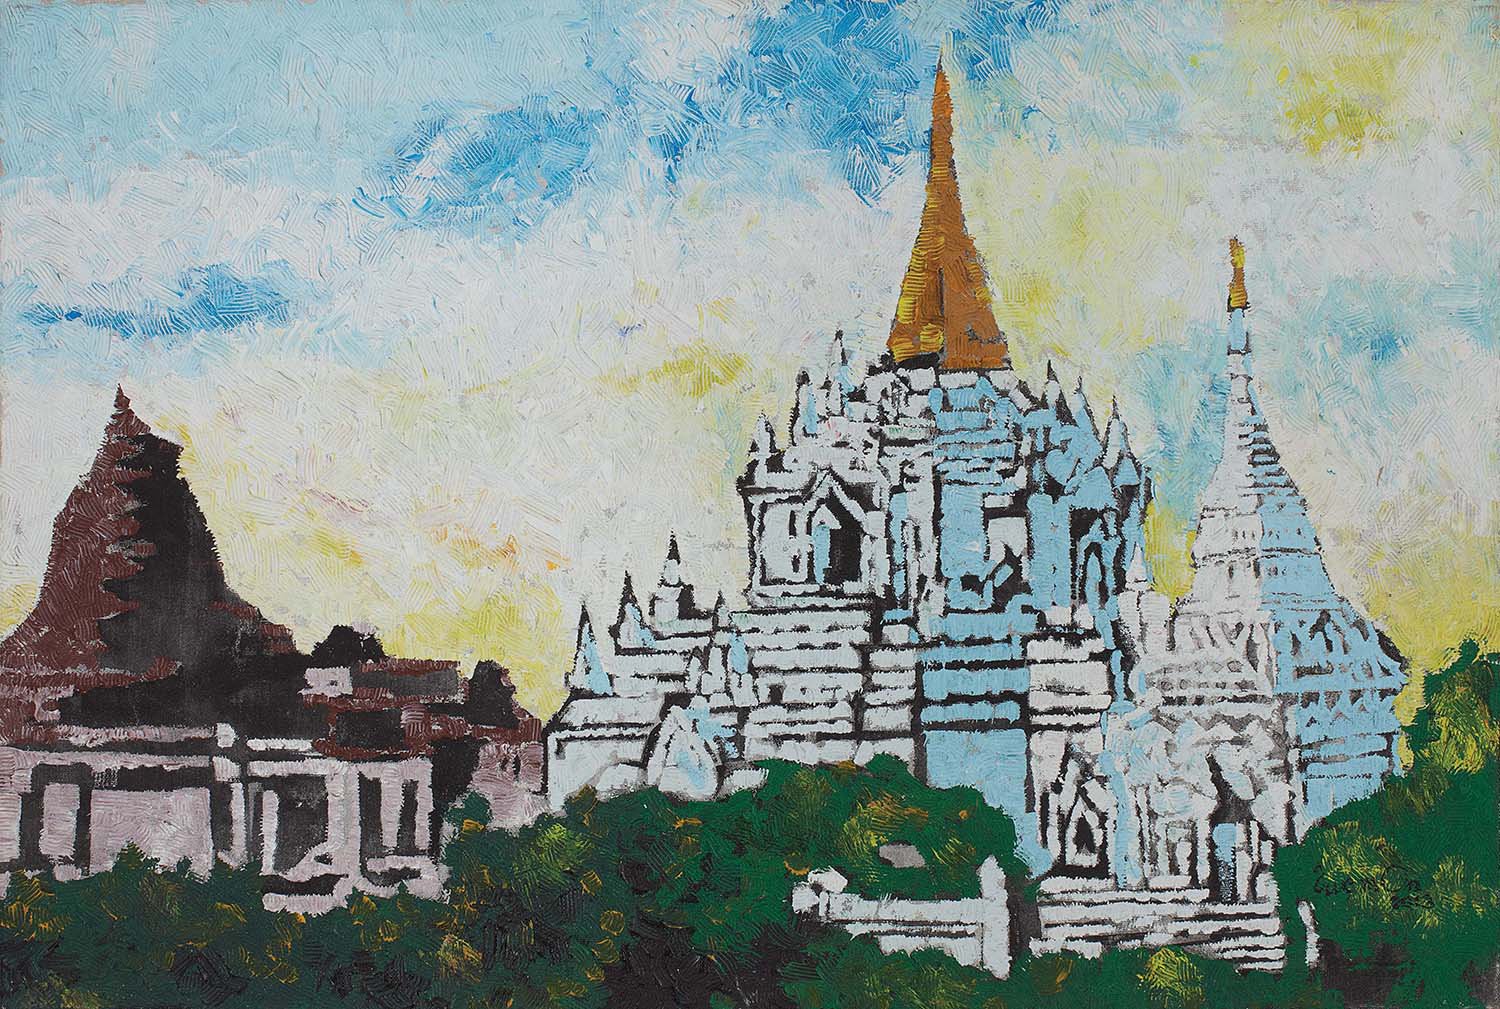 Temple|Zwe Mon- Acrylic on Canvas, 2013, 24 x 36 inches